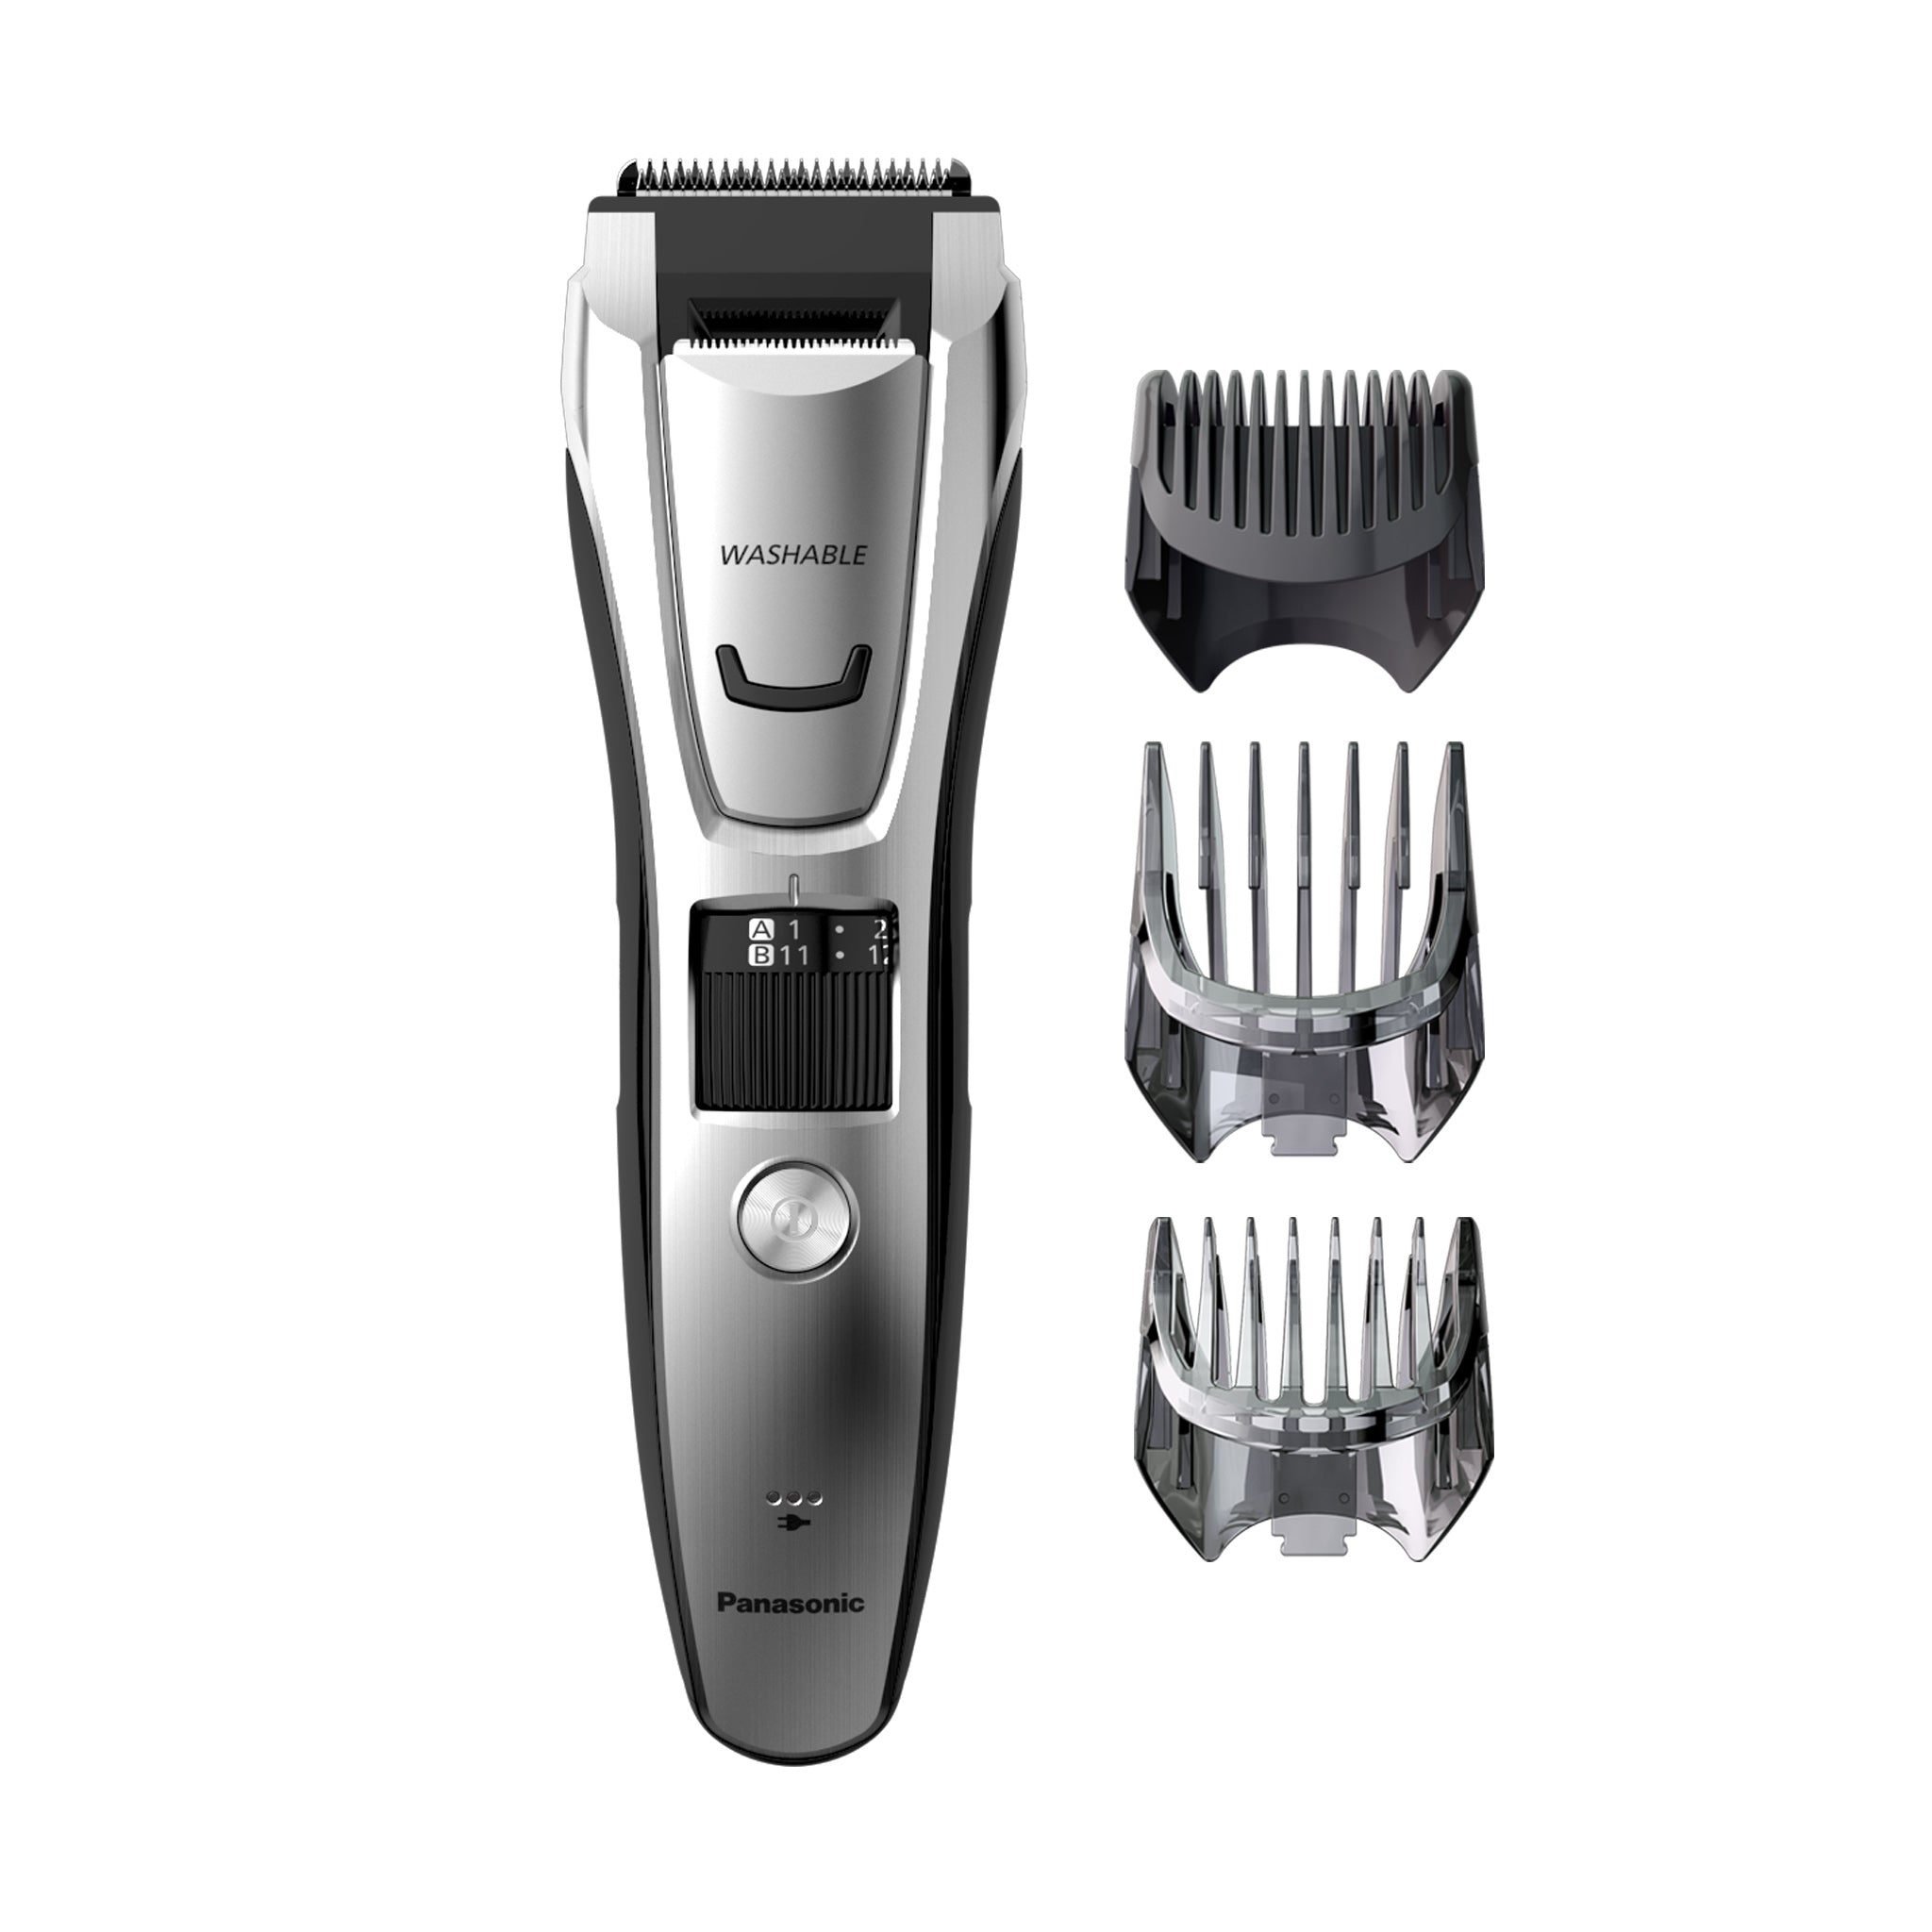 Panasonic Facial Hair Trimmer for Sensitive Skin and First-Time 